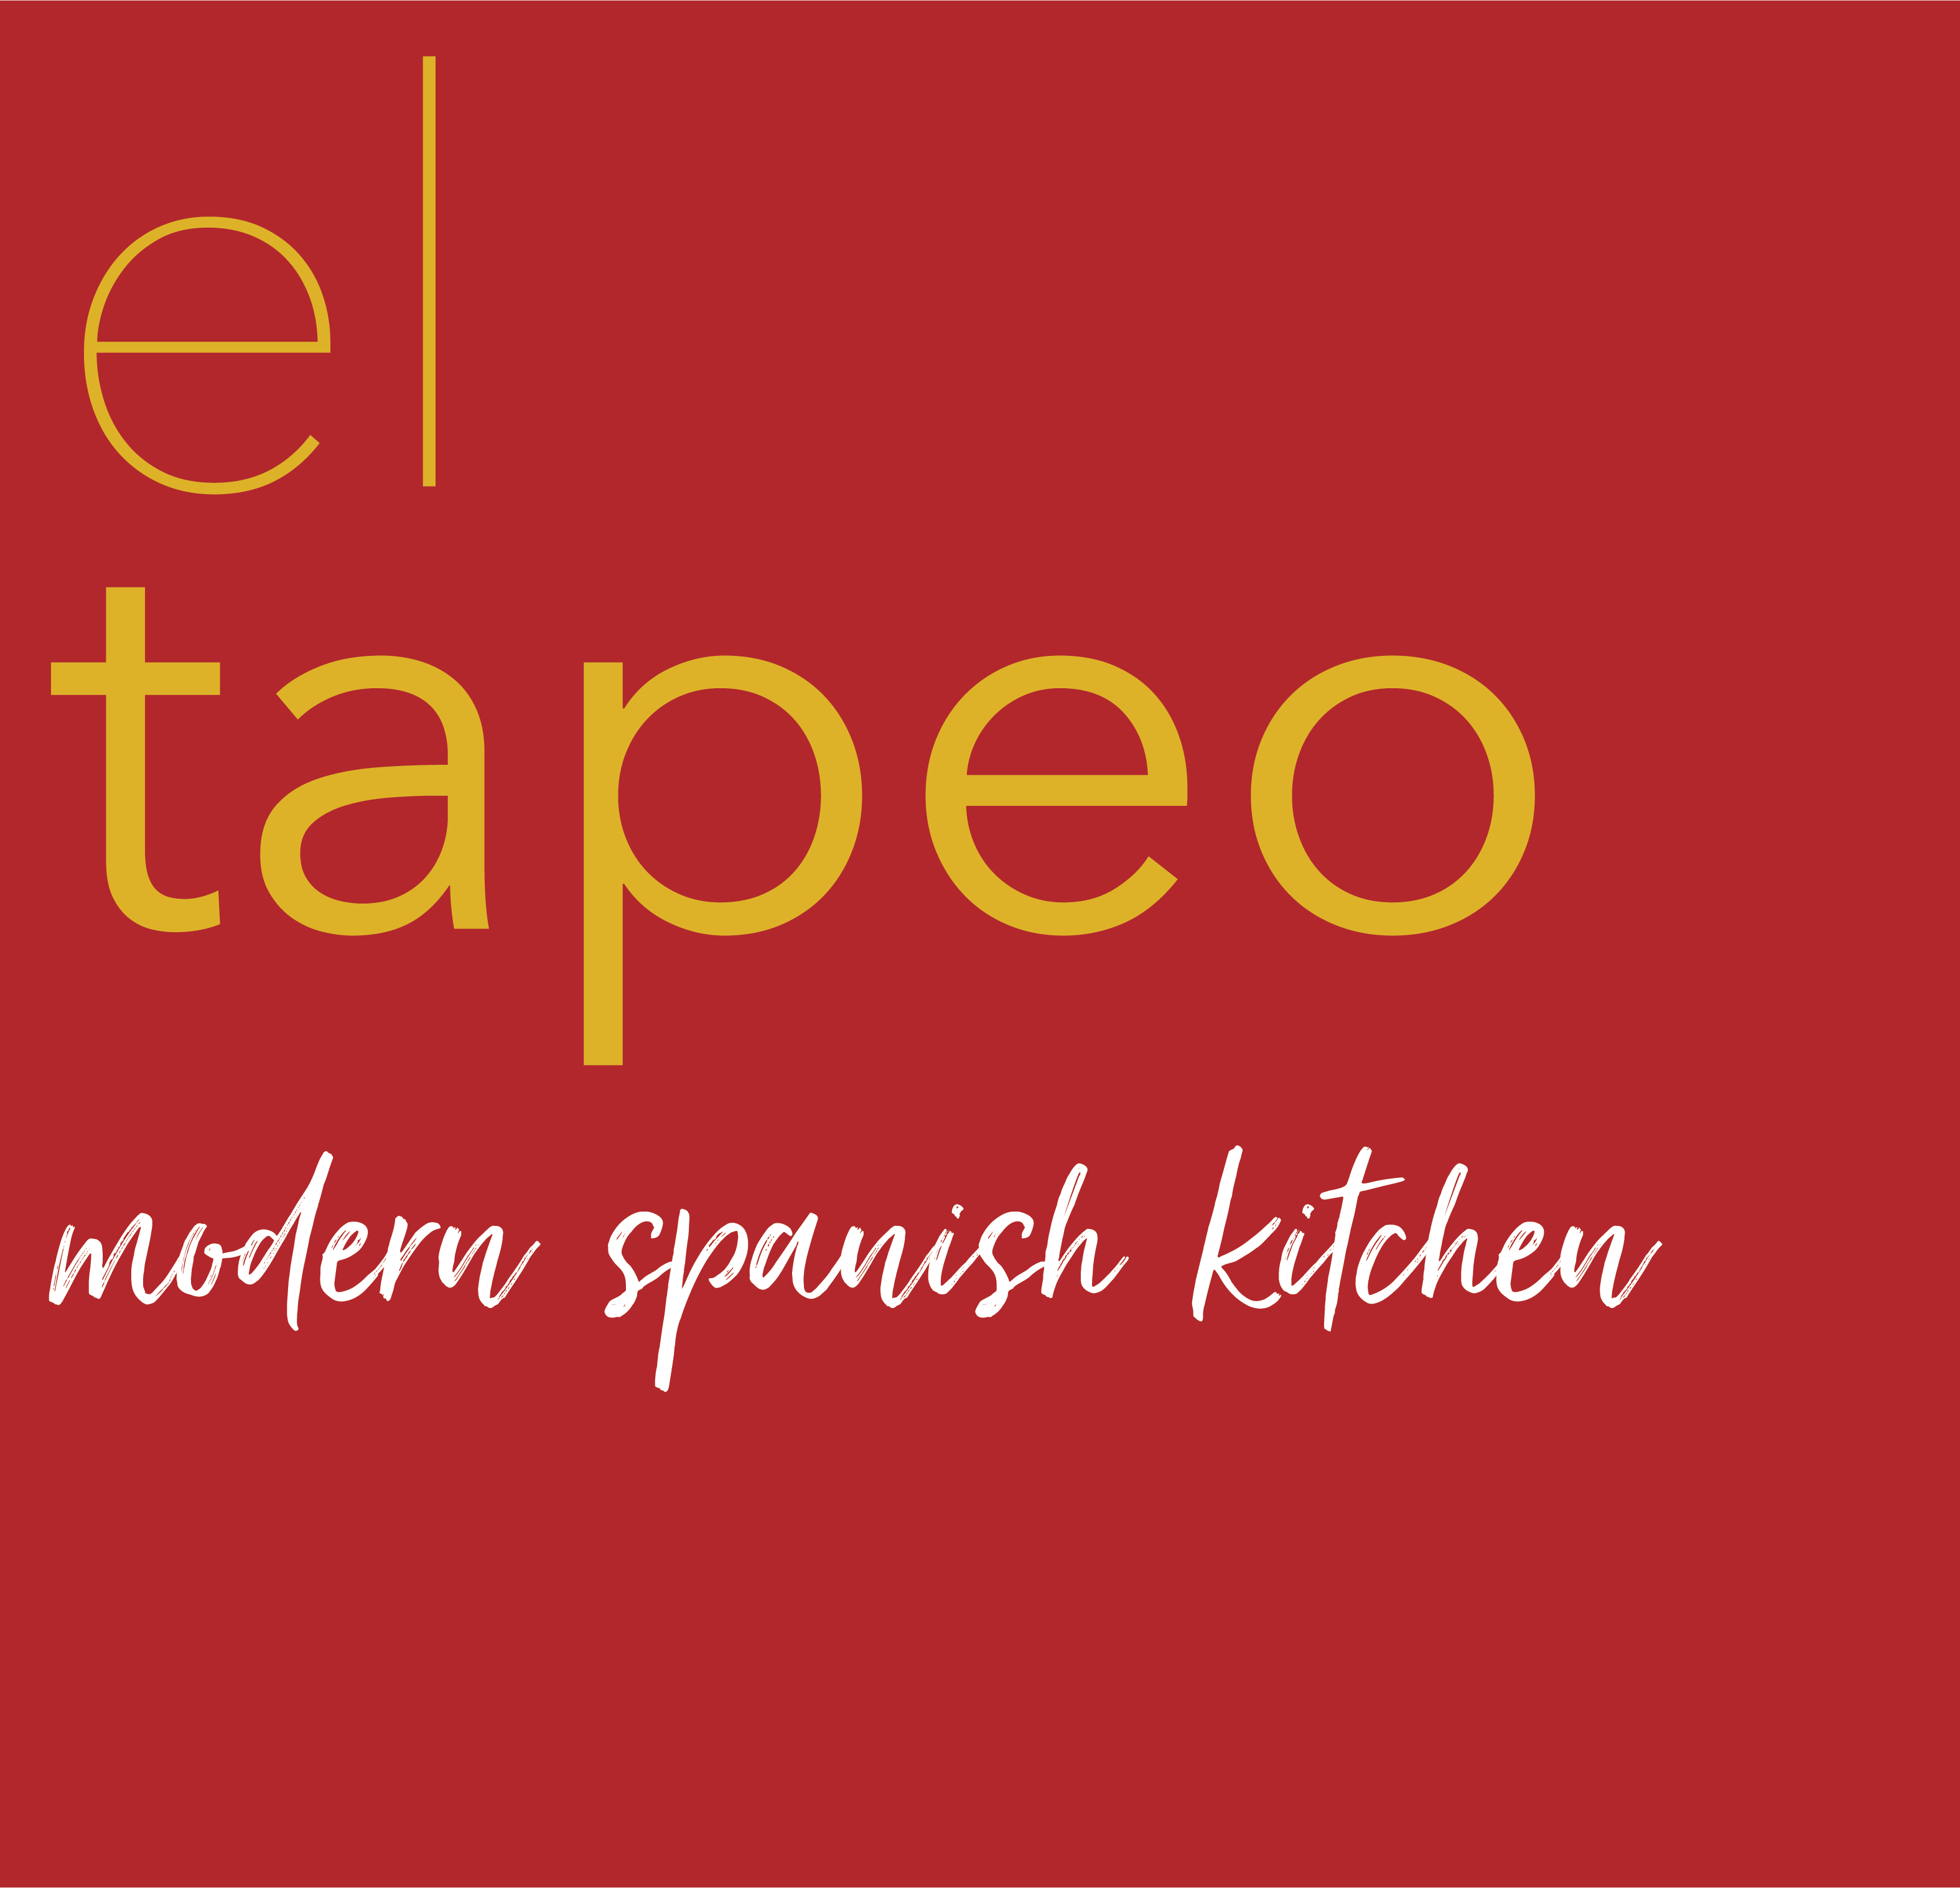 Save $5.00 from El Tapeo Restaurant